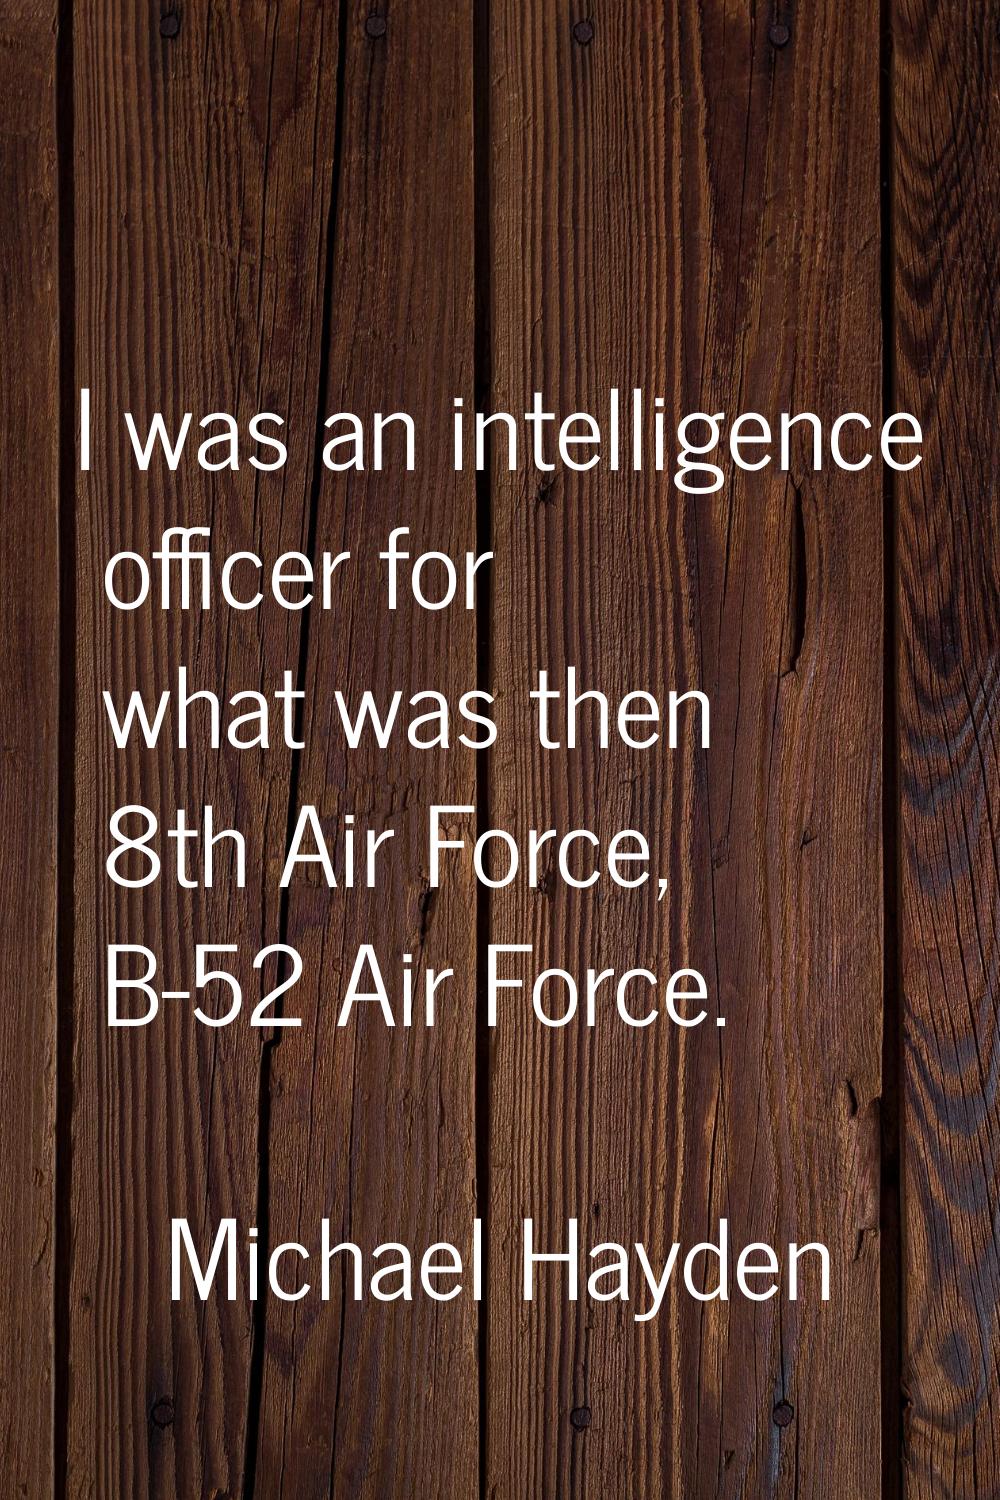 I was an intelligence officer for what was then 8th Air Force, B-52 Air Force.